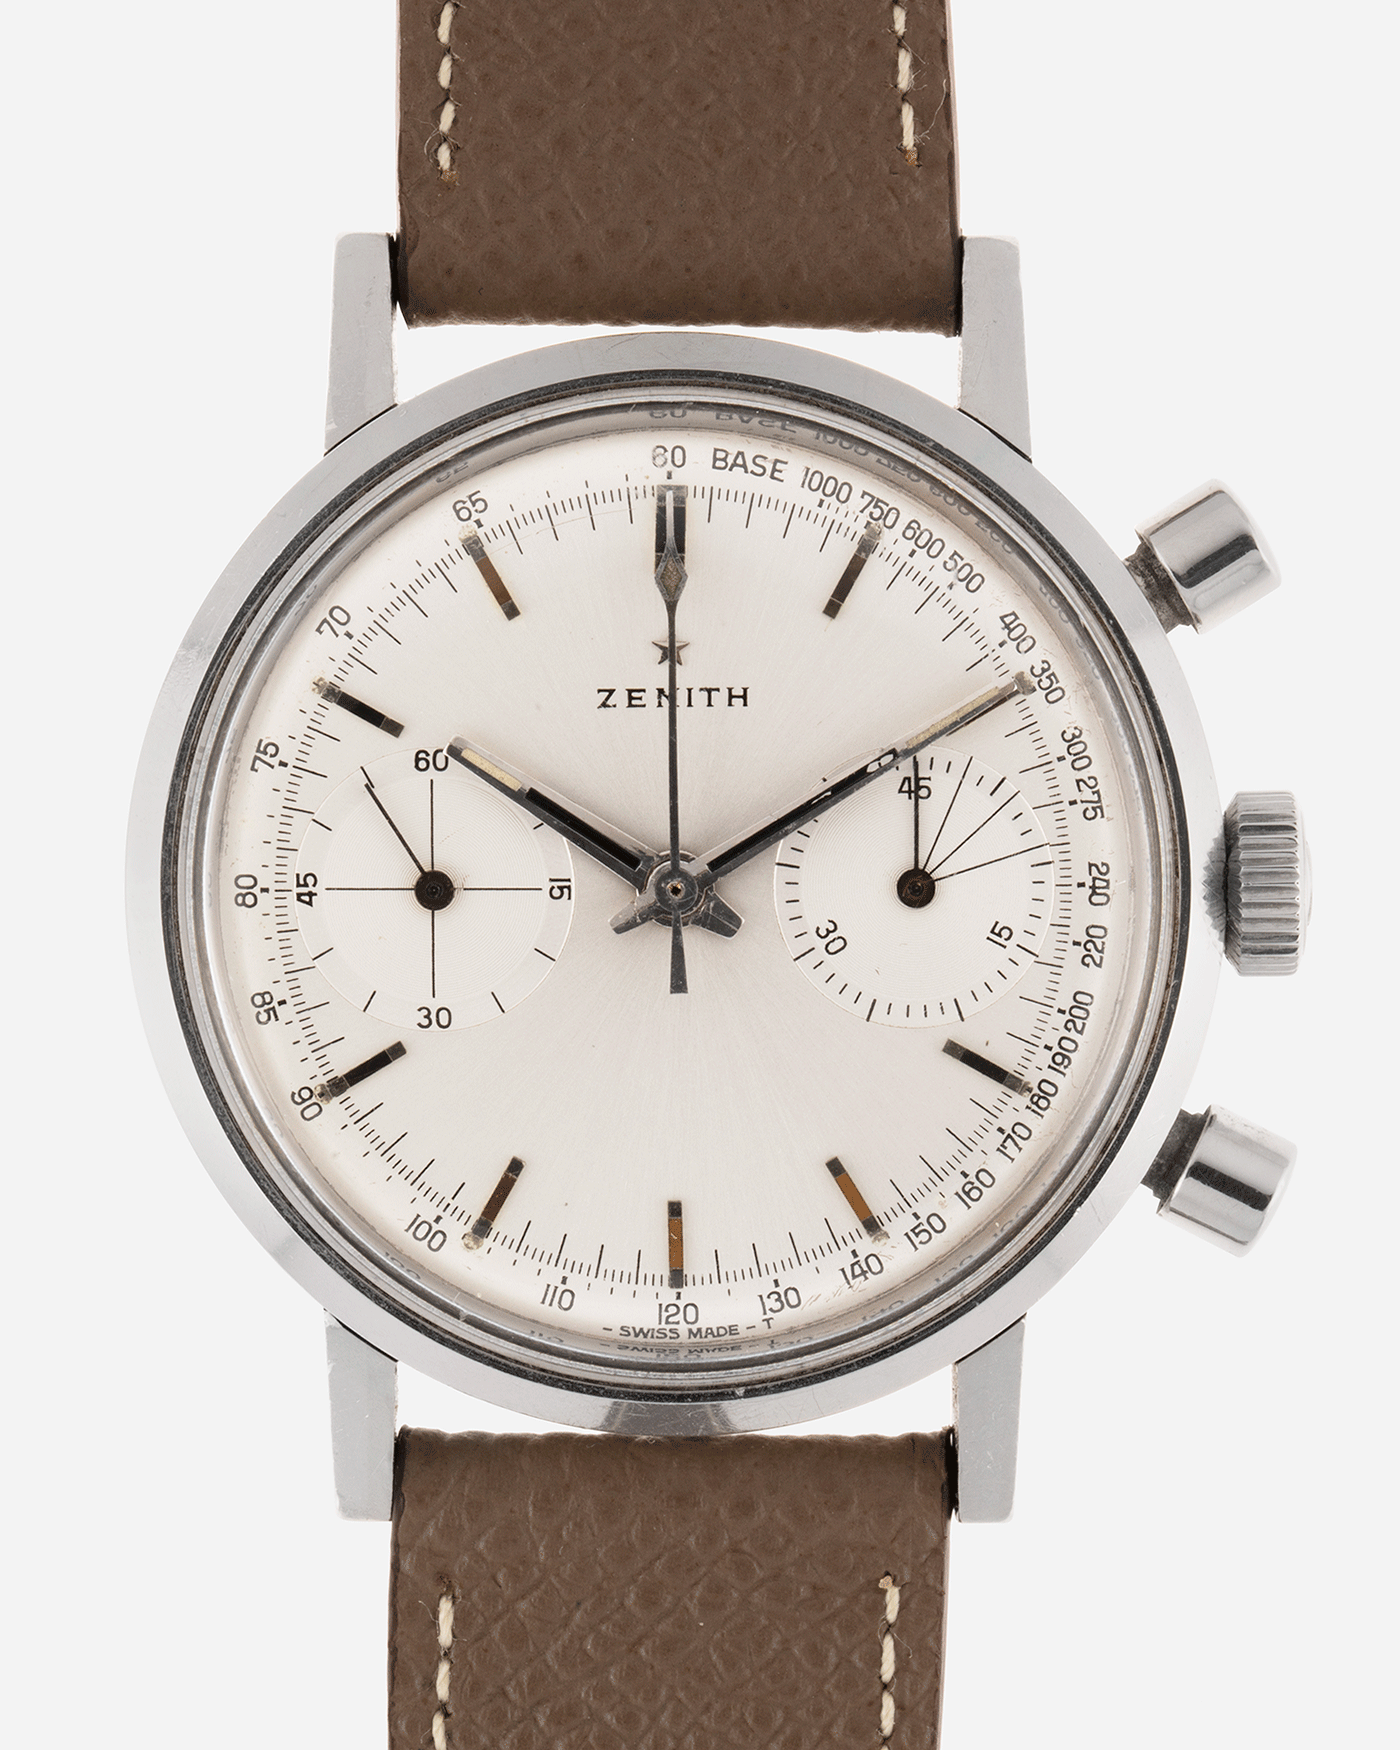 Brand: Zenith Year: 1960’s Model: A271 Reference Number: A271 Material: Stainless Steel Movement: Cal 146DP Case Diameter: 37mm Lug Width: 19mm Strap: Nostime Taupe Grained Calf